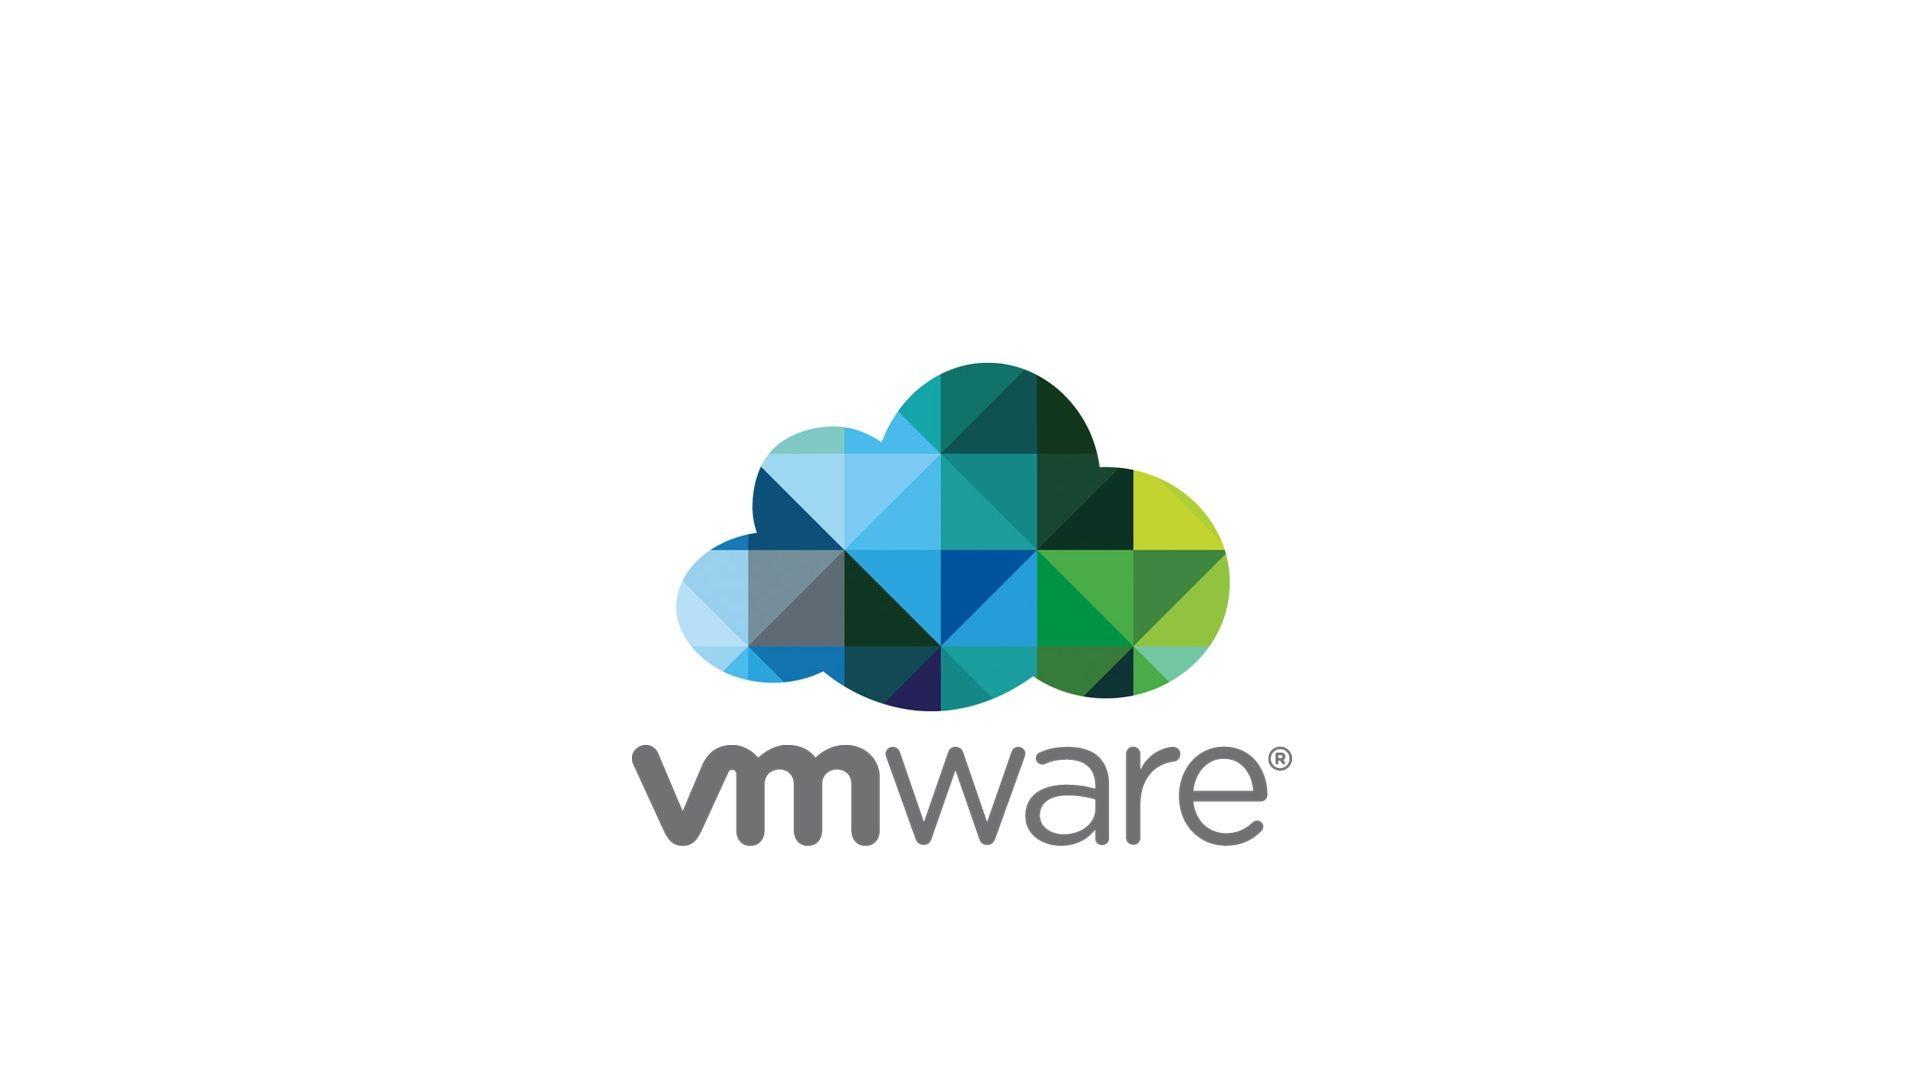 Vmware Inc Logo - Managed Service Accounts (GMSA) and vRA - VMware Cloud Management